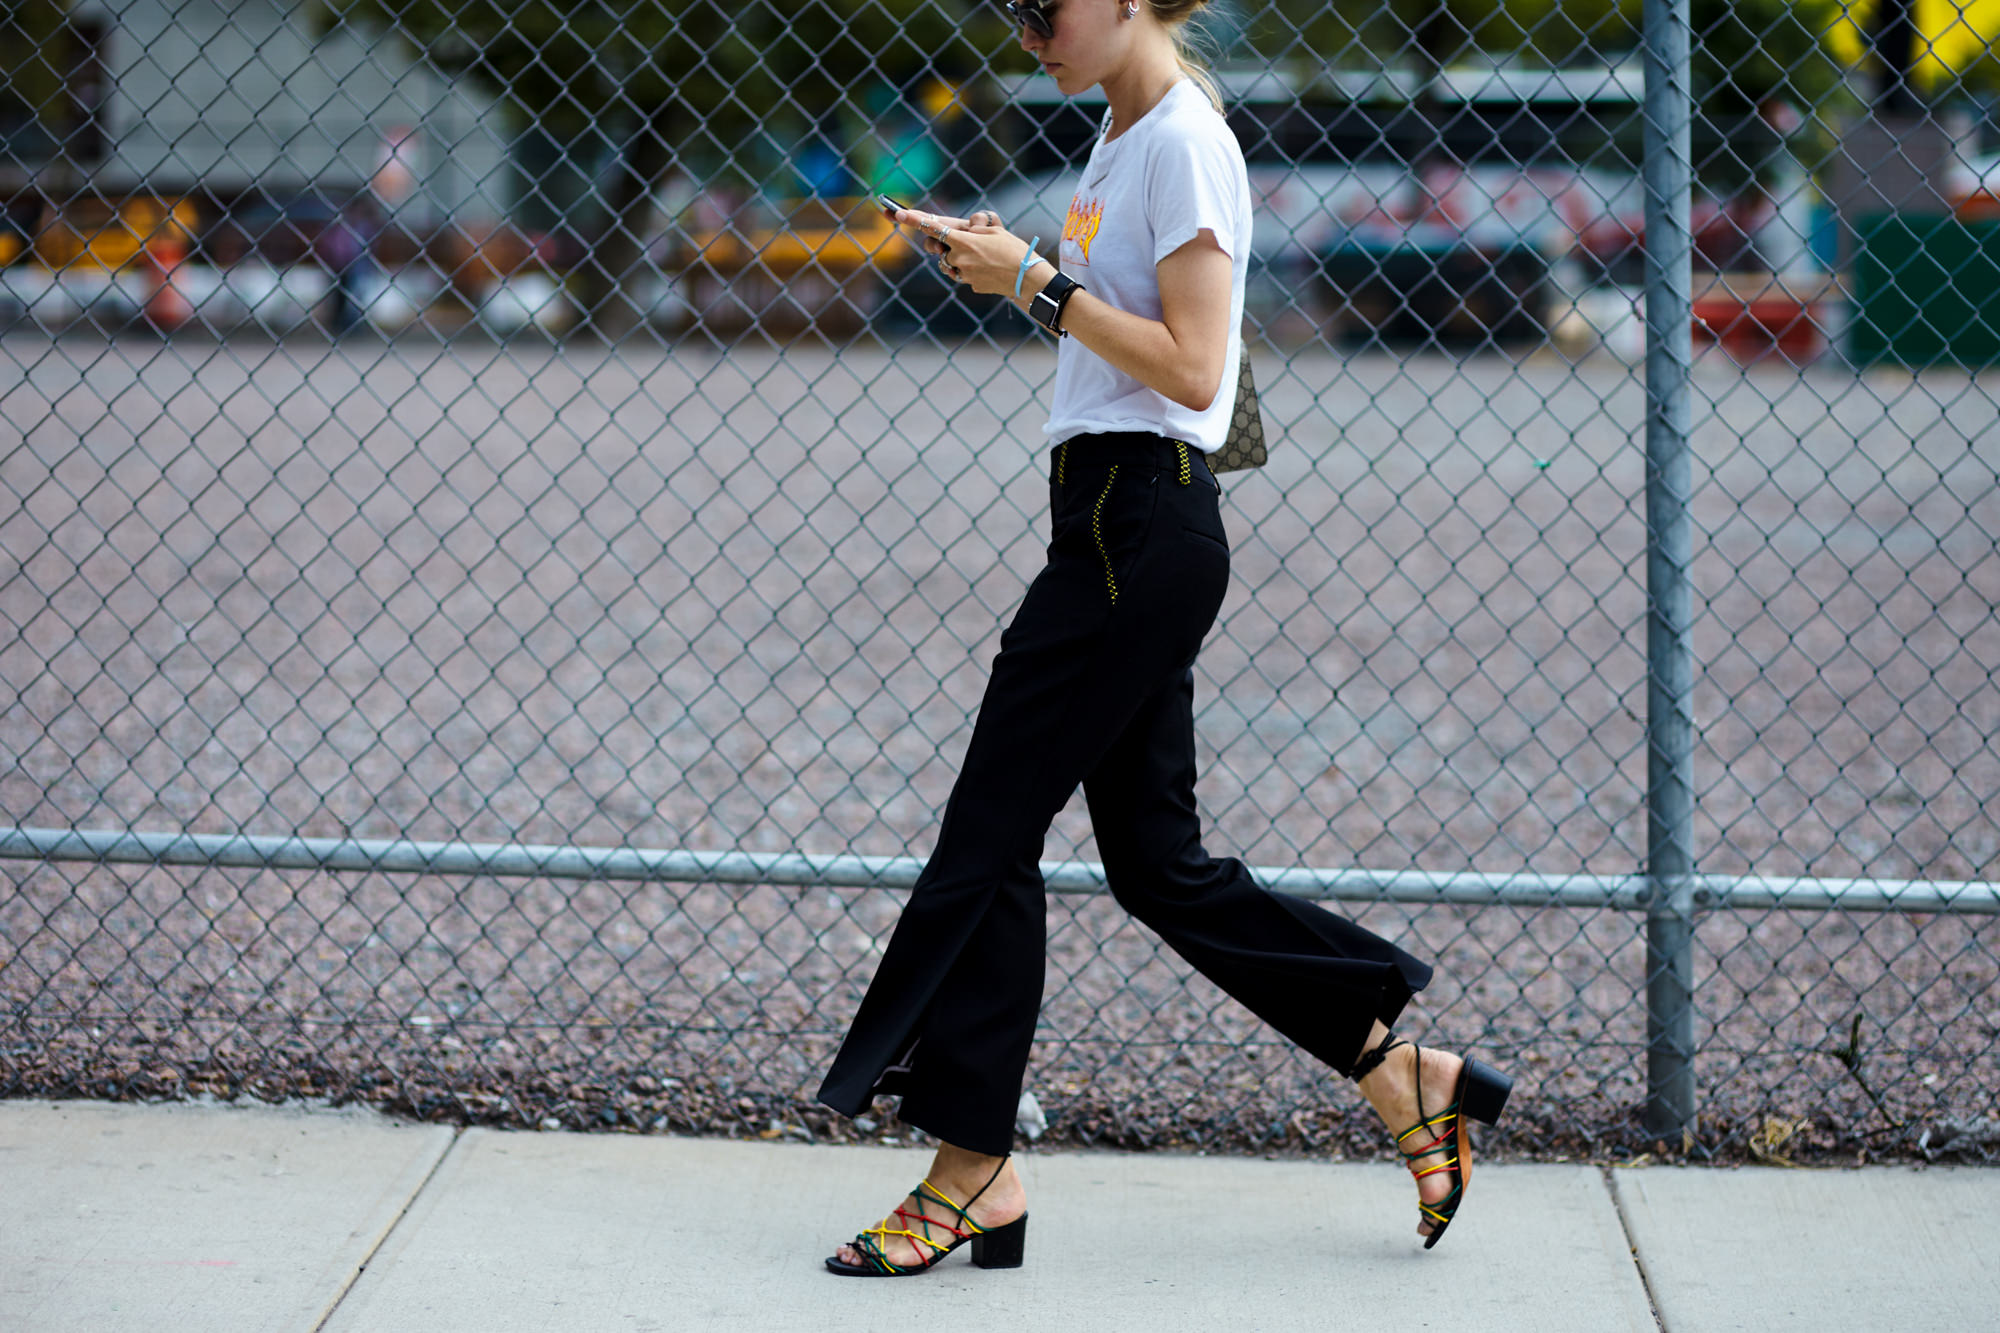 NYFW Spring-Summer 2017 Streetstyle: Jessica Minkoff wearing white t-shirt and black flare pants after a show in New York, September 2016